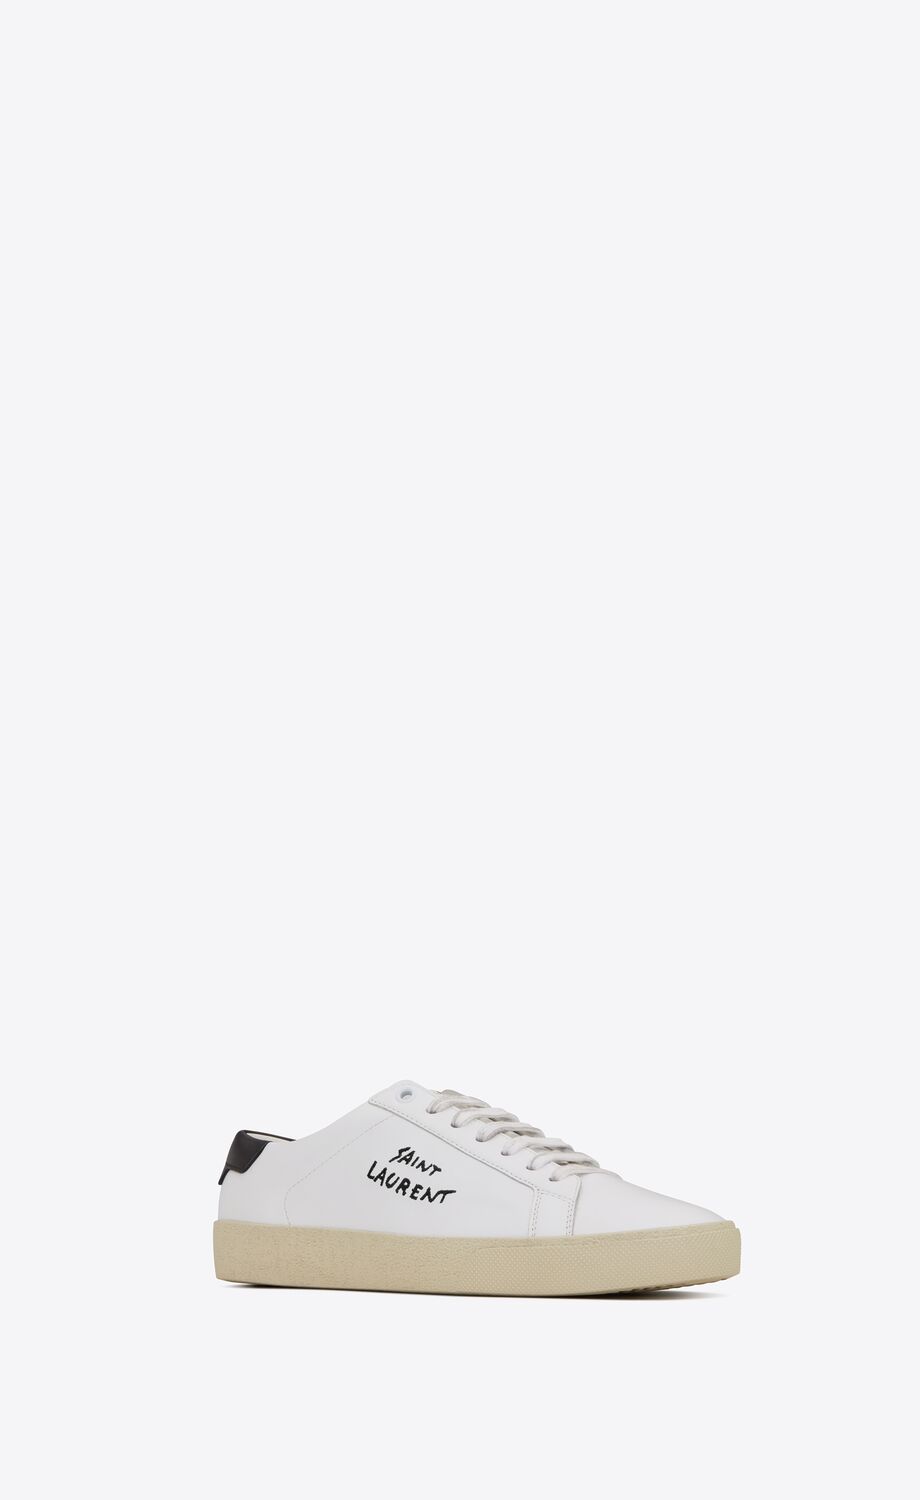 Court classic sl/06 embroidered sneakers in smooth leather | Saint ...